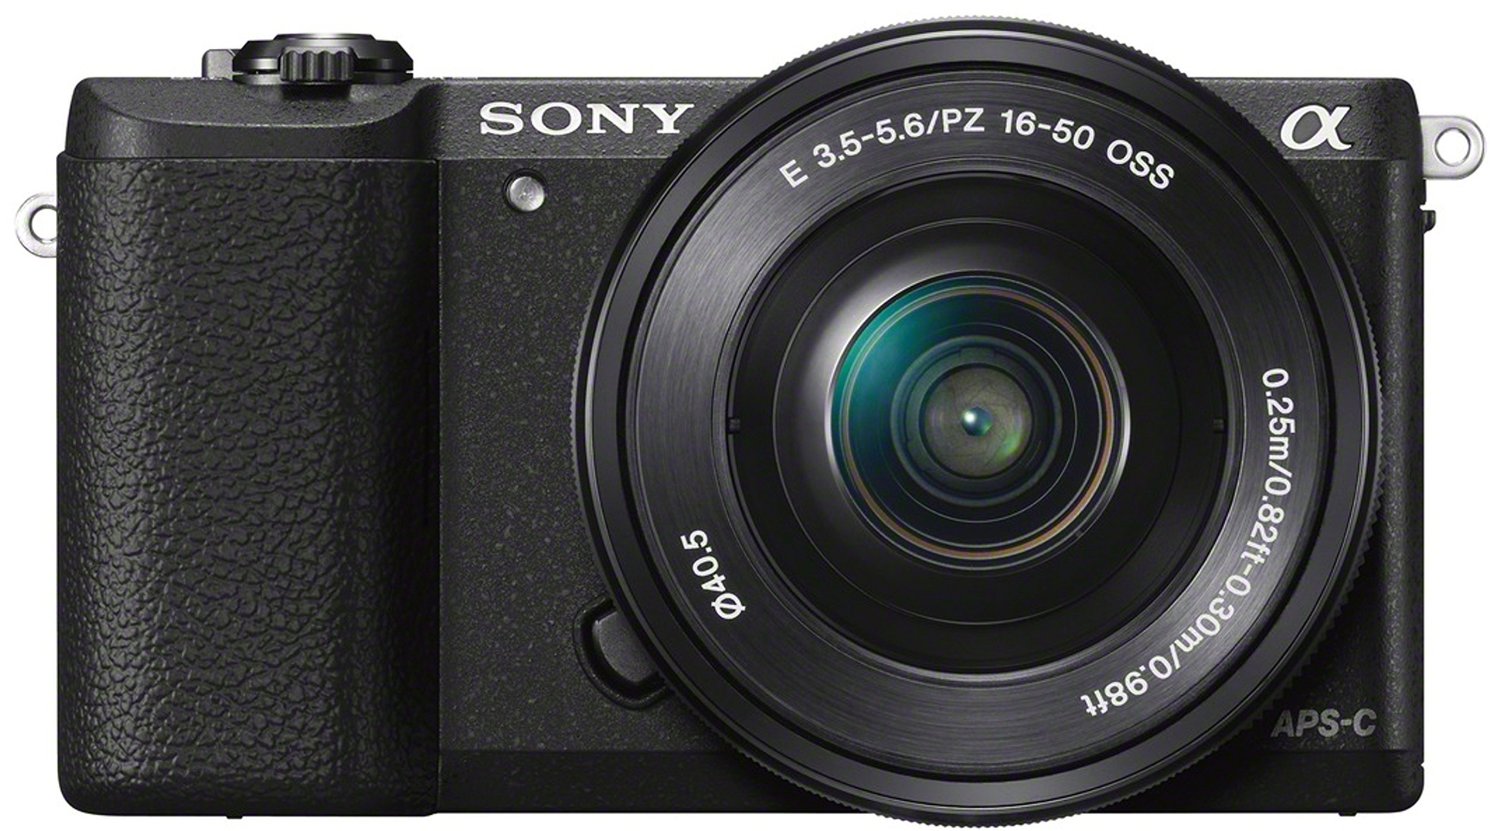 Sony Alpha A5100 24.3MP Interchangeable Lens Camera with 16-50 Lens – Black